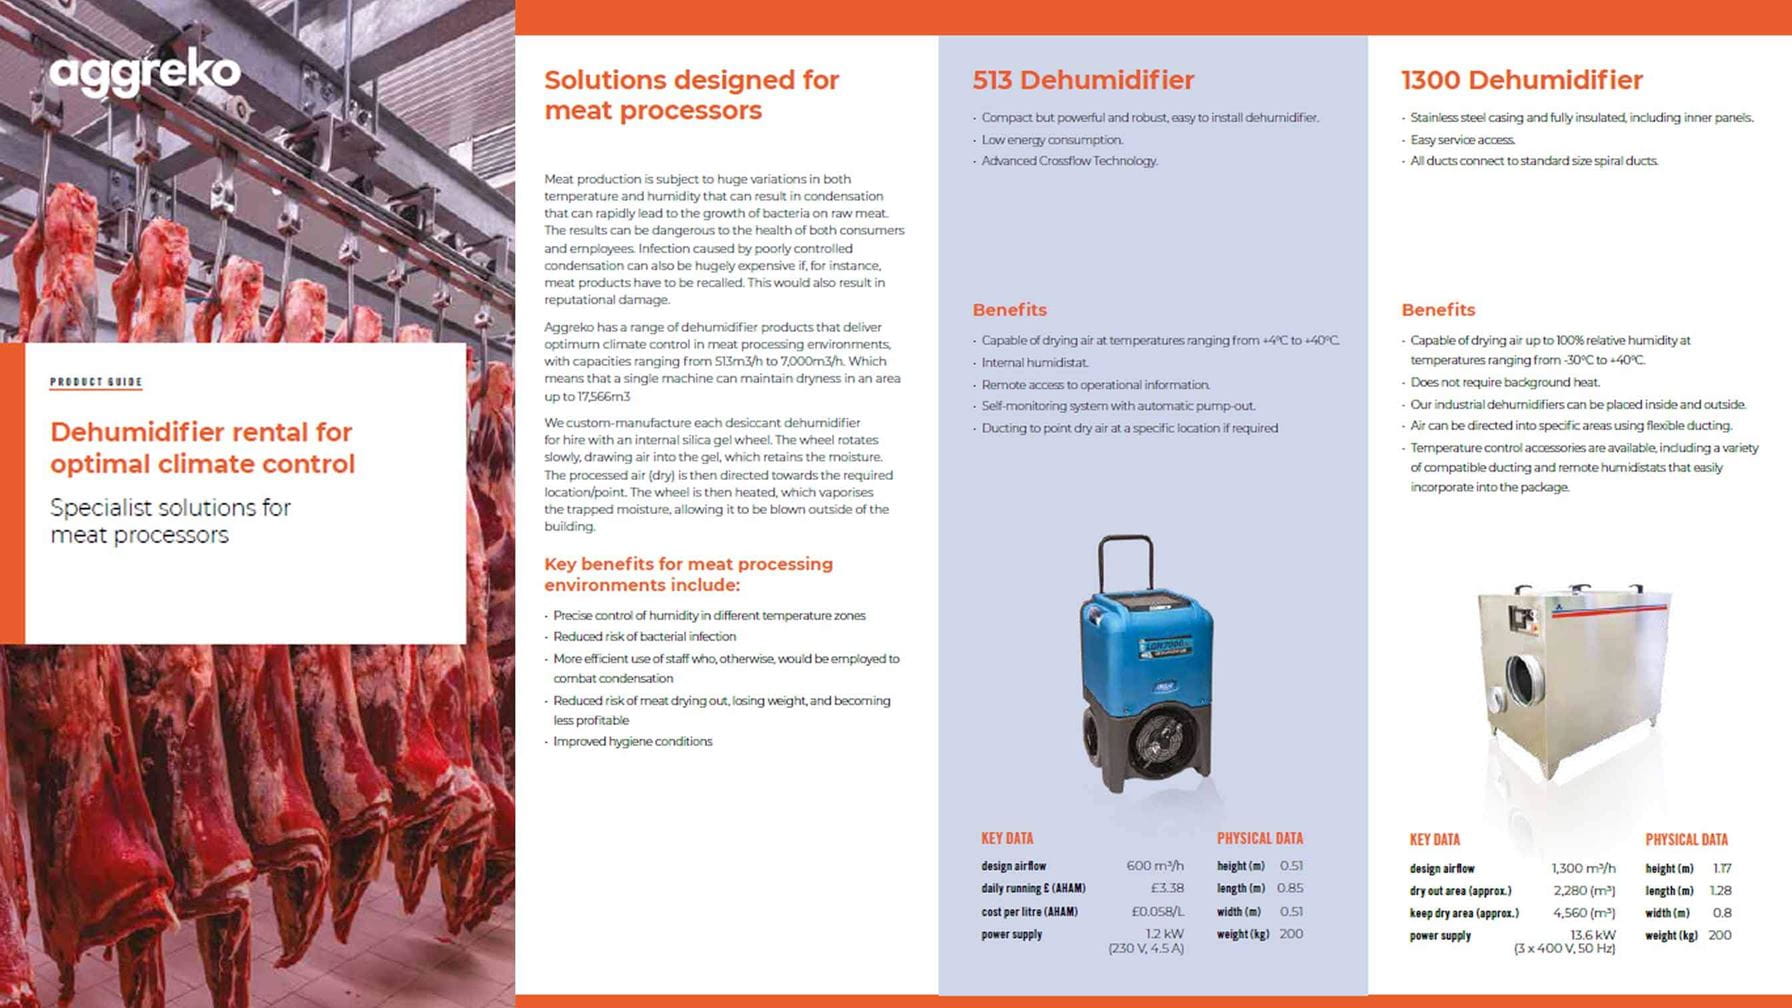 Dehumidifier product guide - meat processing